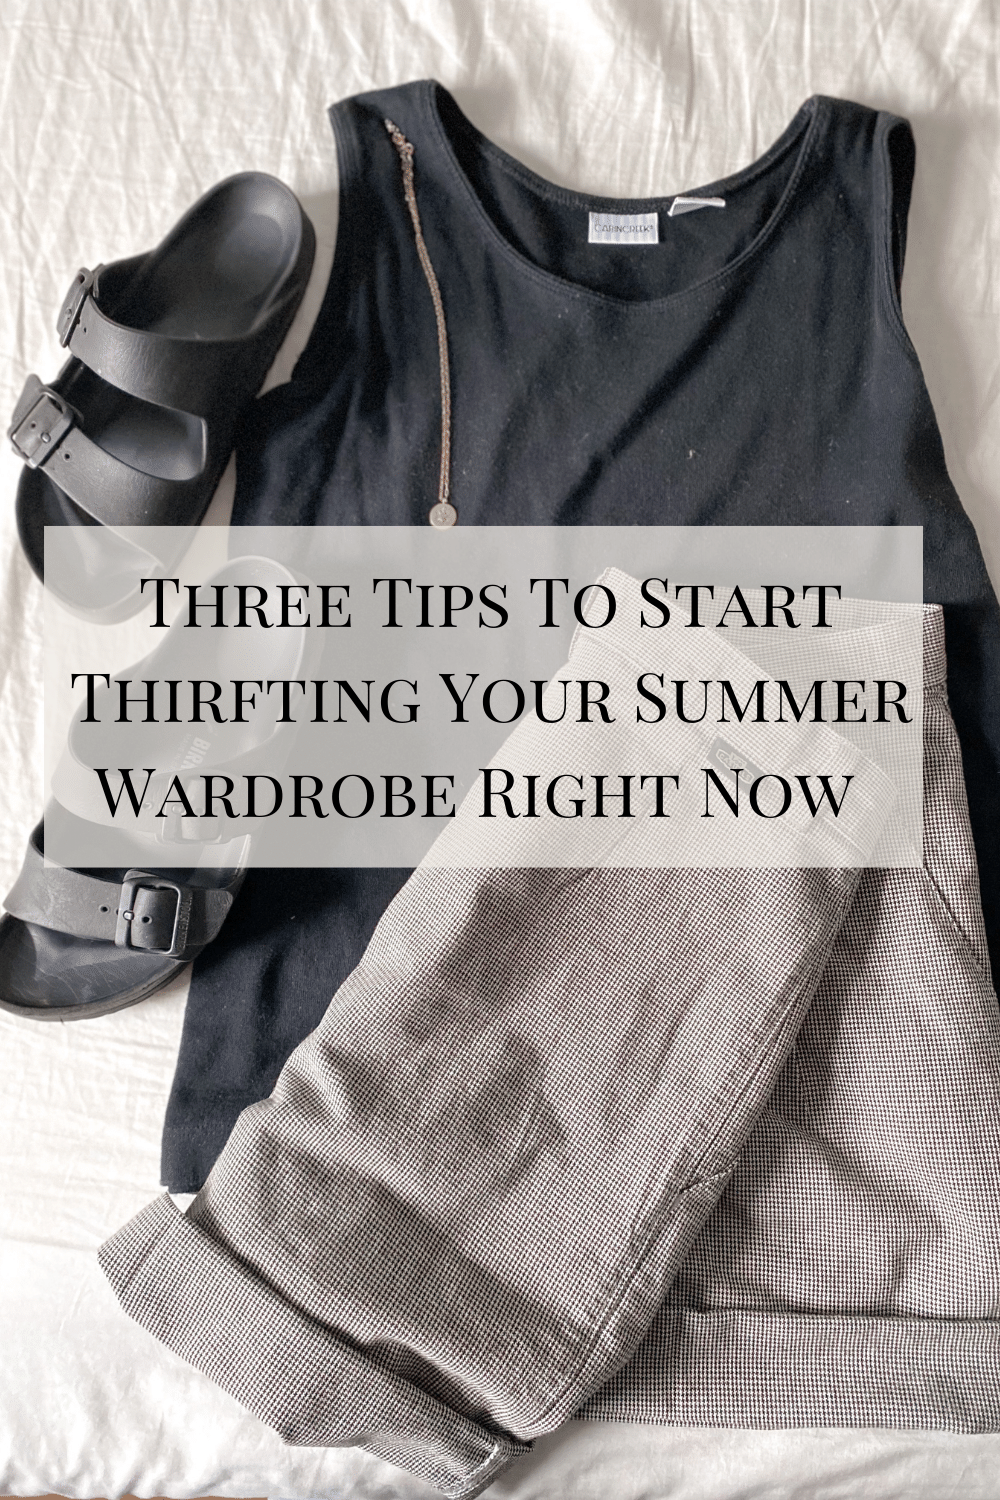 Three tips to Start Thrifting your summer wardrobe right now